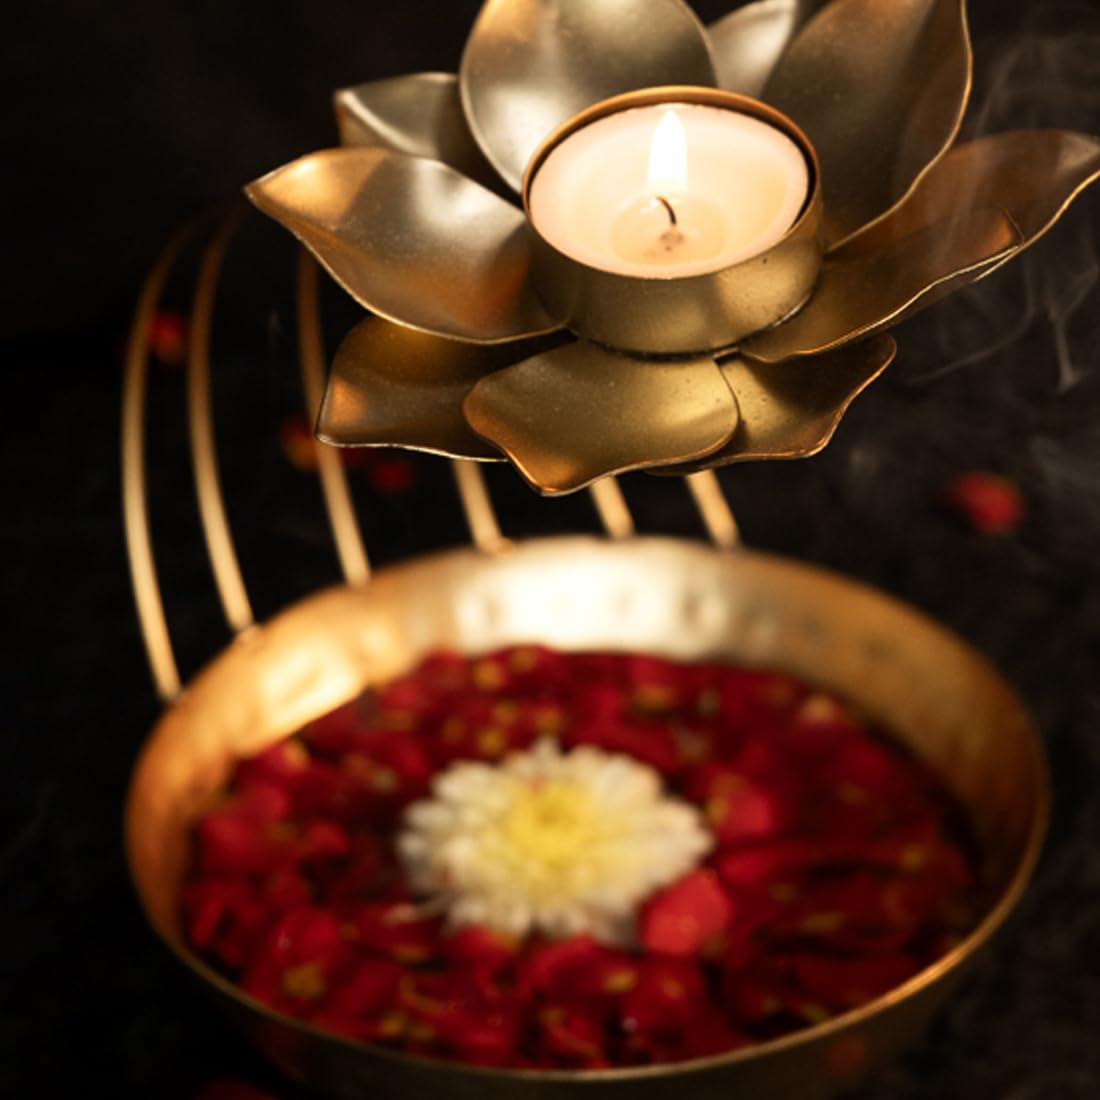 Ekhasa Urli Bowl Tealight Candle Holder for Home Decor | Floating Flowers or Tealight Candles Water Bowl for Diwali Pooja & Other Festivals Decoration | Table Decoratives Gift for Various Occassions